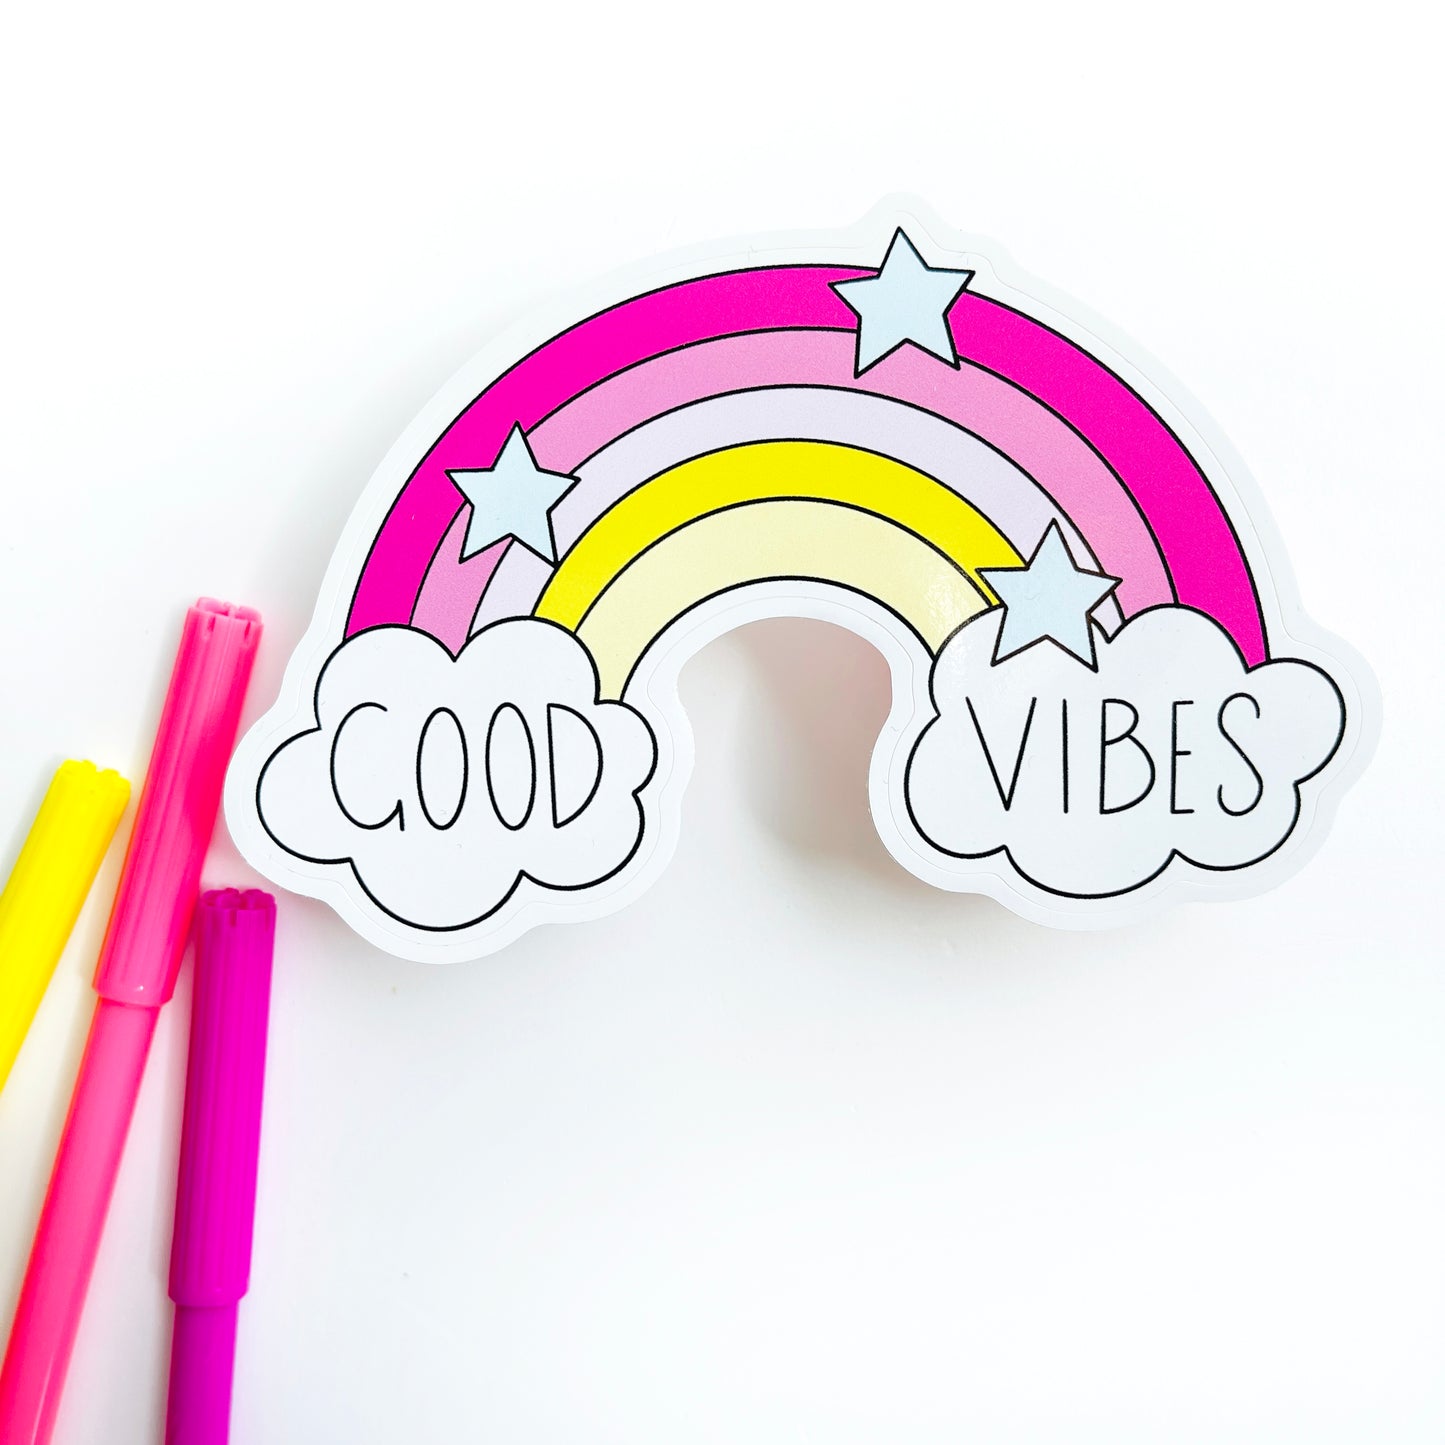 Load image into Gallery viewer, Good vibes rainbow sticker - Loubiblu
